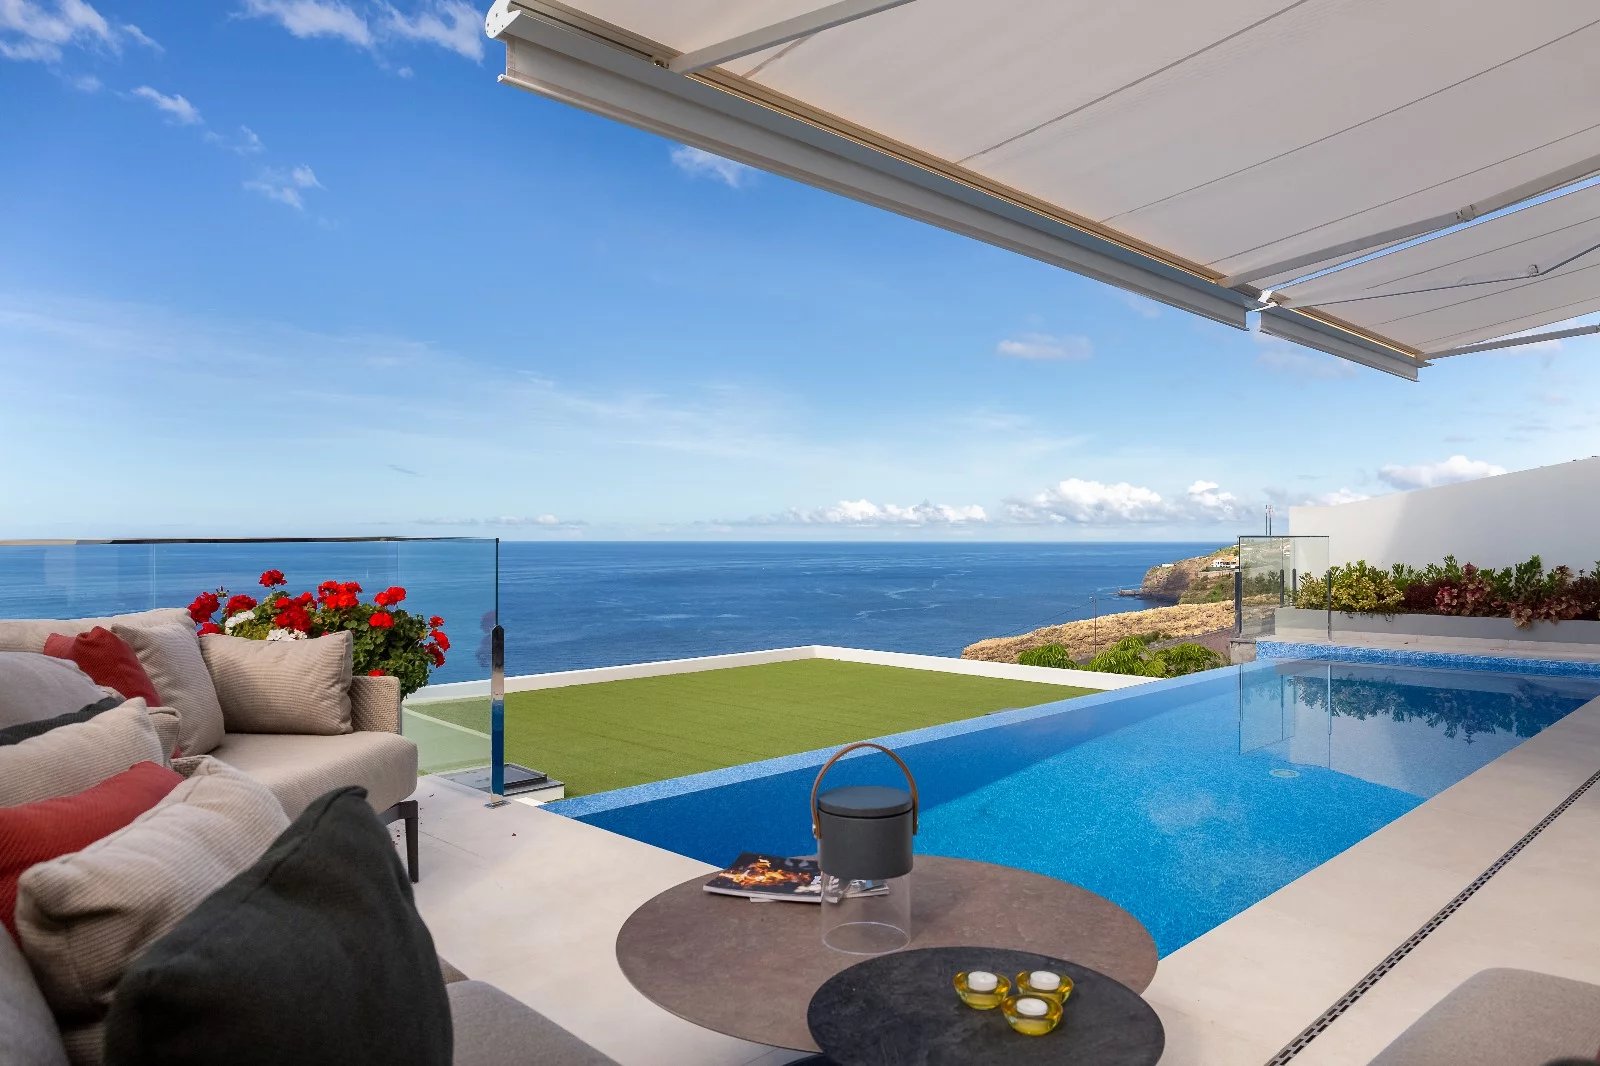 Magnificent villa with infinity pool facing the ocean.